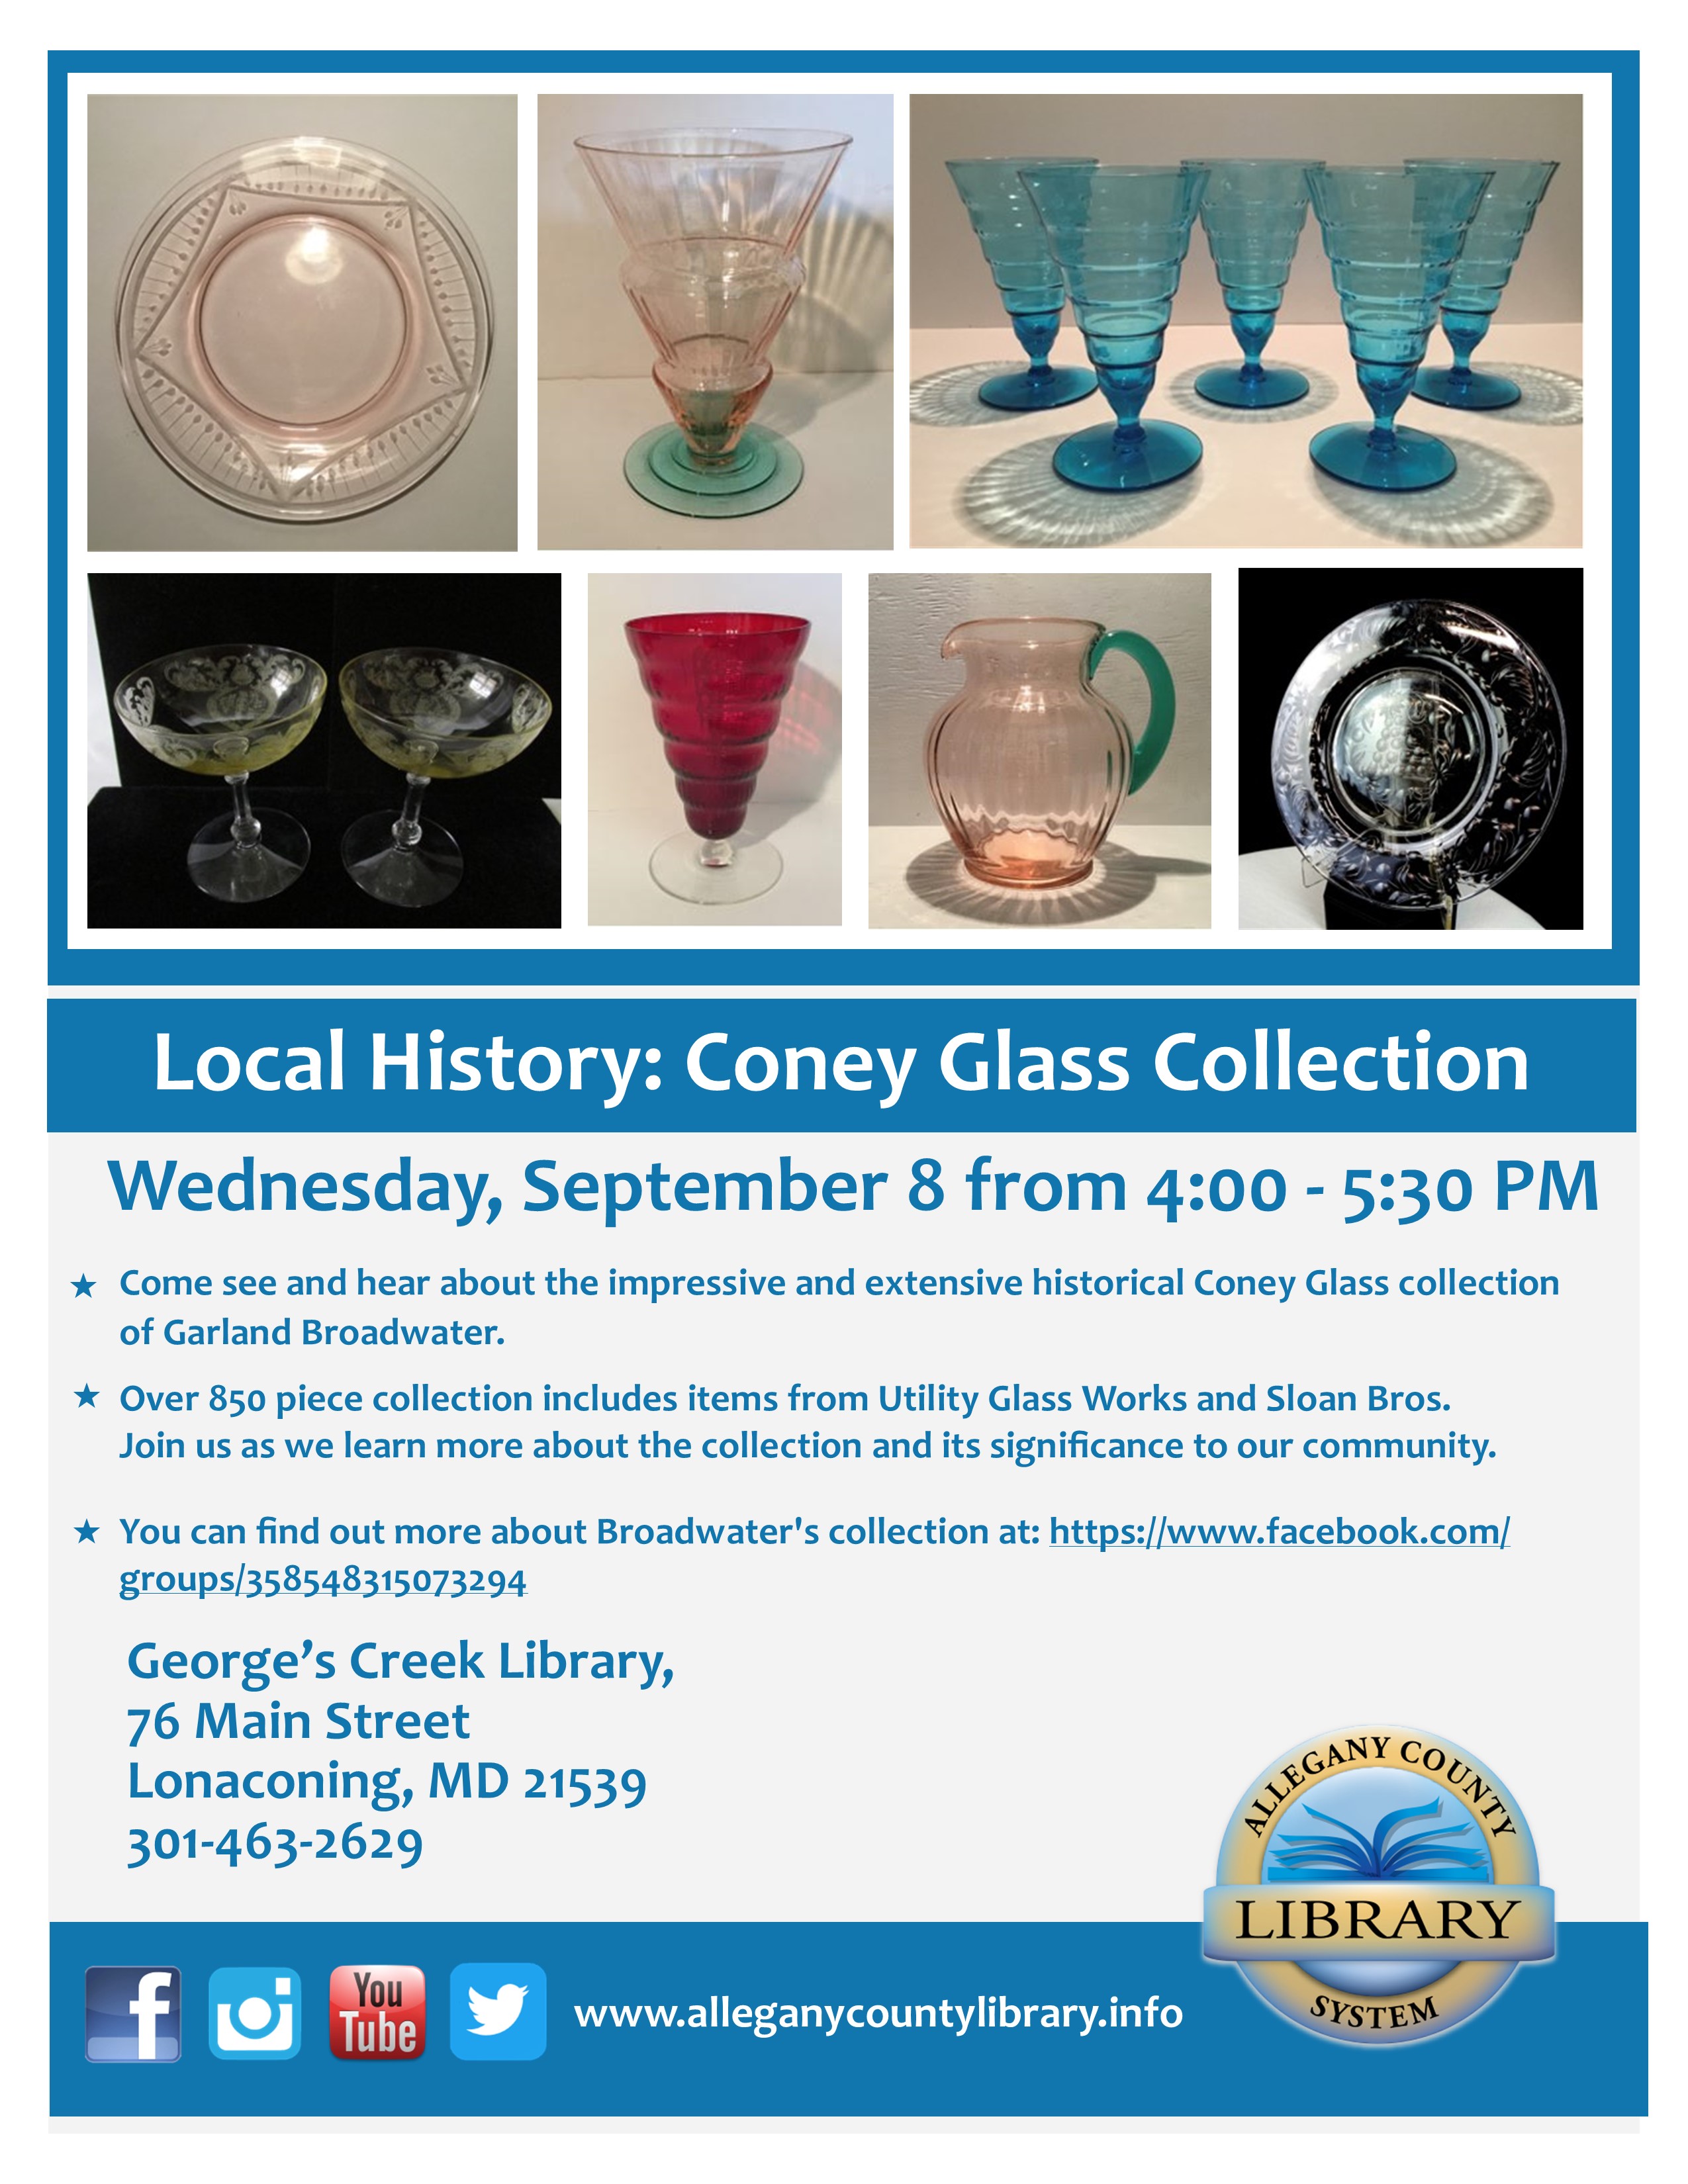 Event flyer with six photos of Coney glass